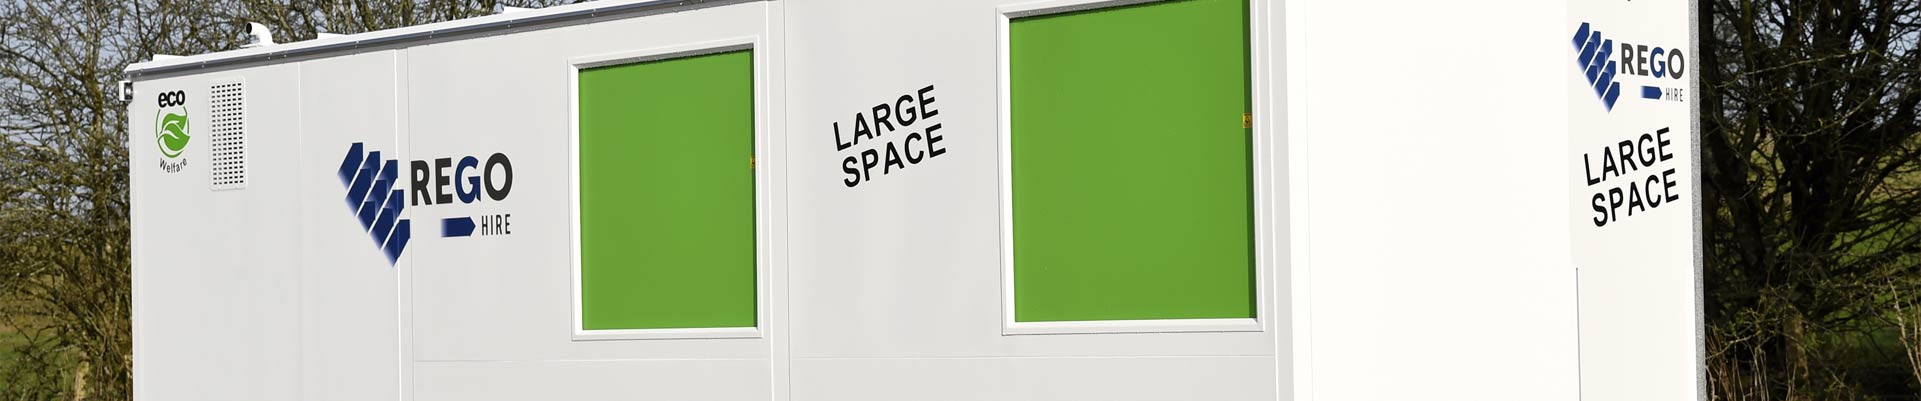 Rego Hire, Large Space